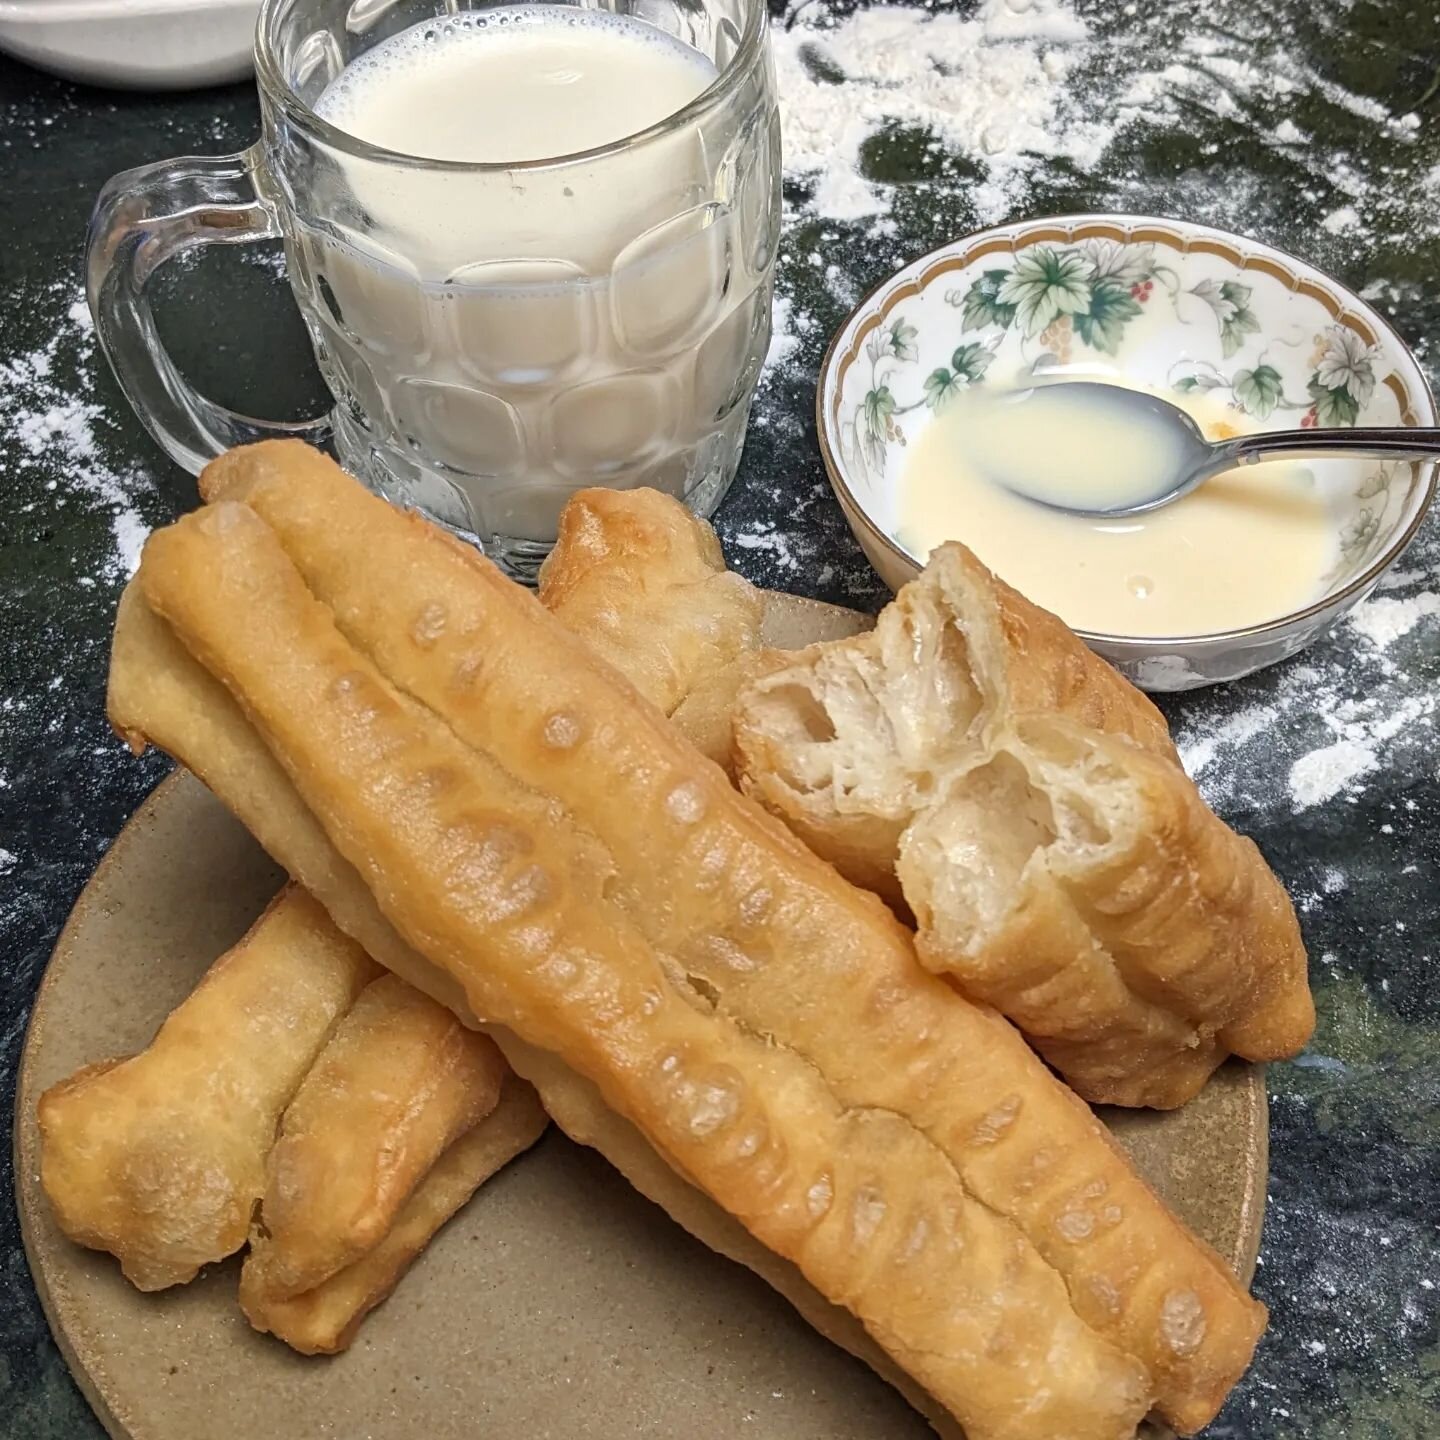 Oil-Fried Ghosts 油炸鬼
Also known as Chinese donuts

In our visit to Taipei we had this almost every morning, on the side of the road, dipping donuts in freshly made cold soy milk. 

As a child, I used to have it, dipped in condensed milk. For some rea